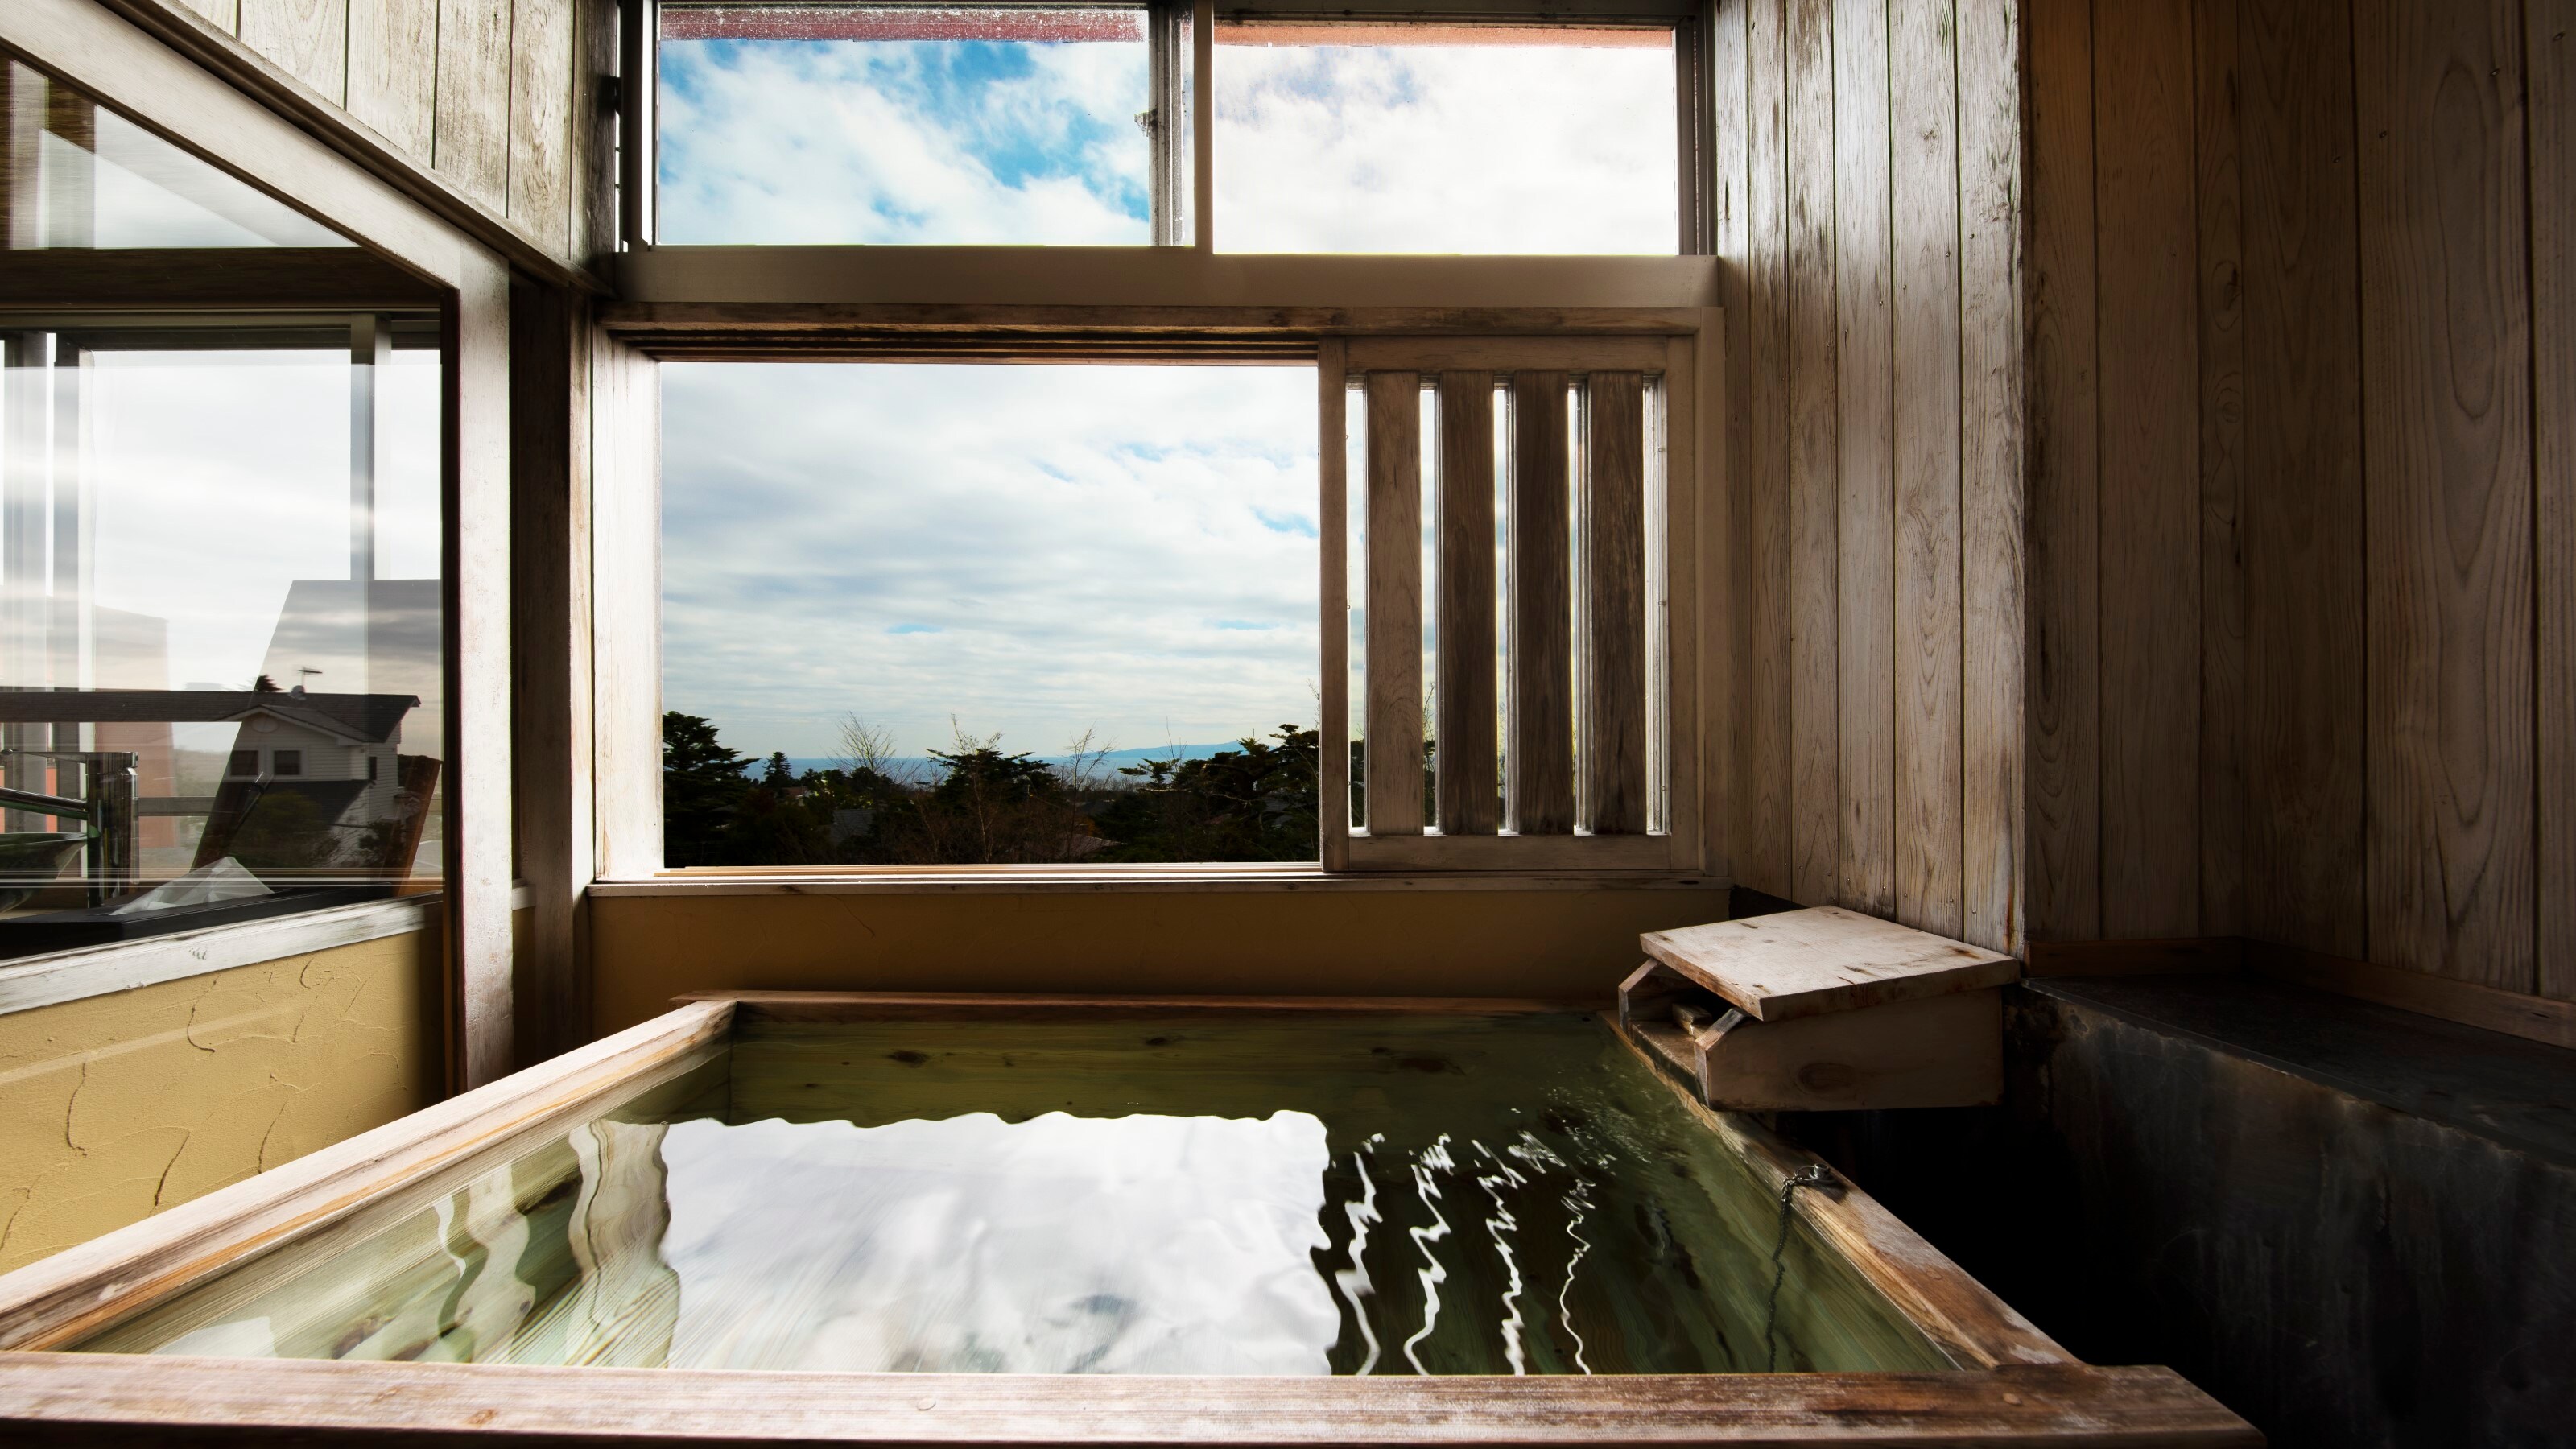 Japanese-style room with 8 tatami mats, smoking room with open-air bath, Kano